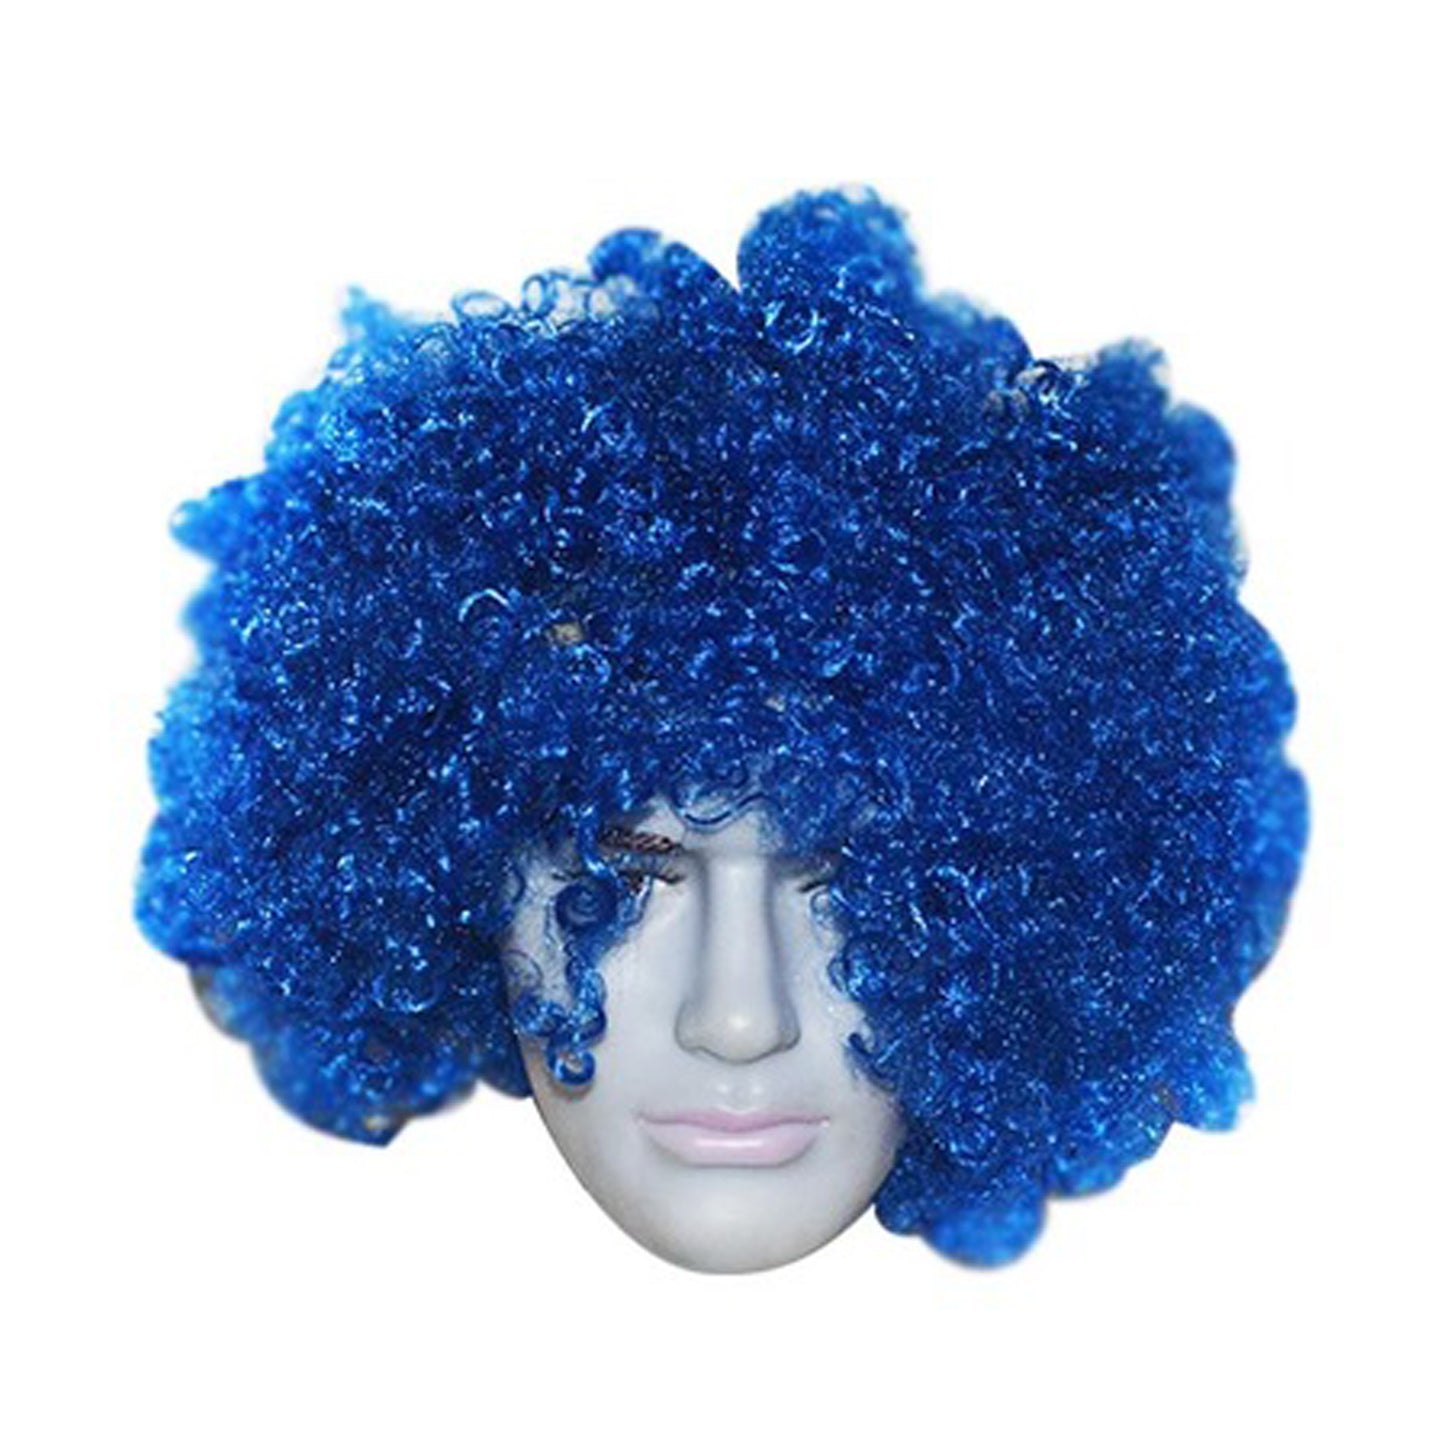 Afro Clown Wig